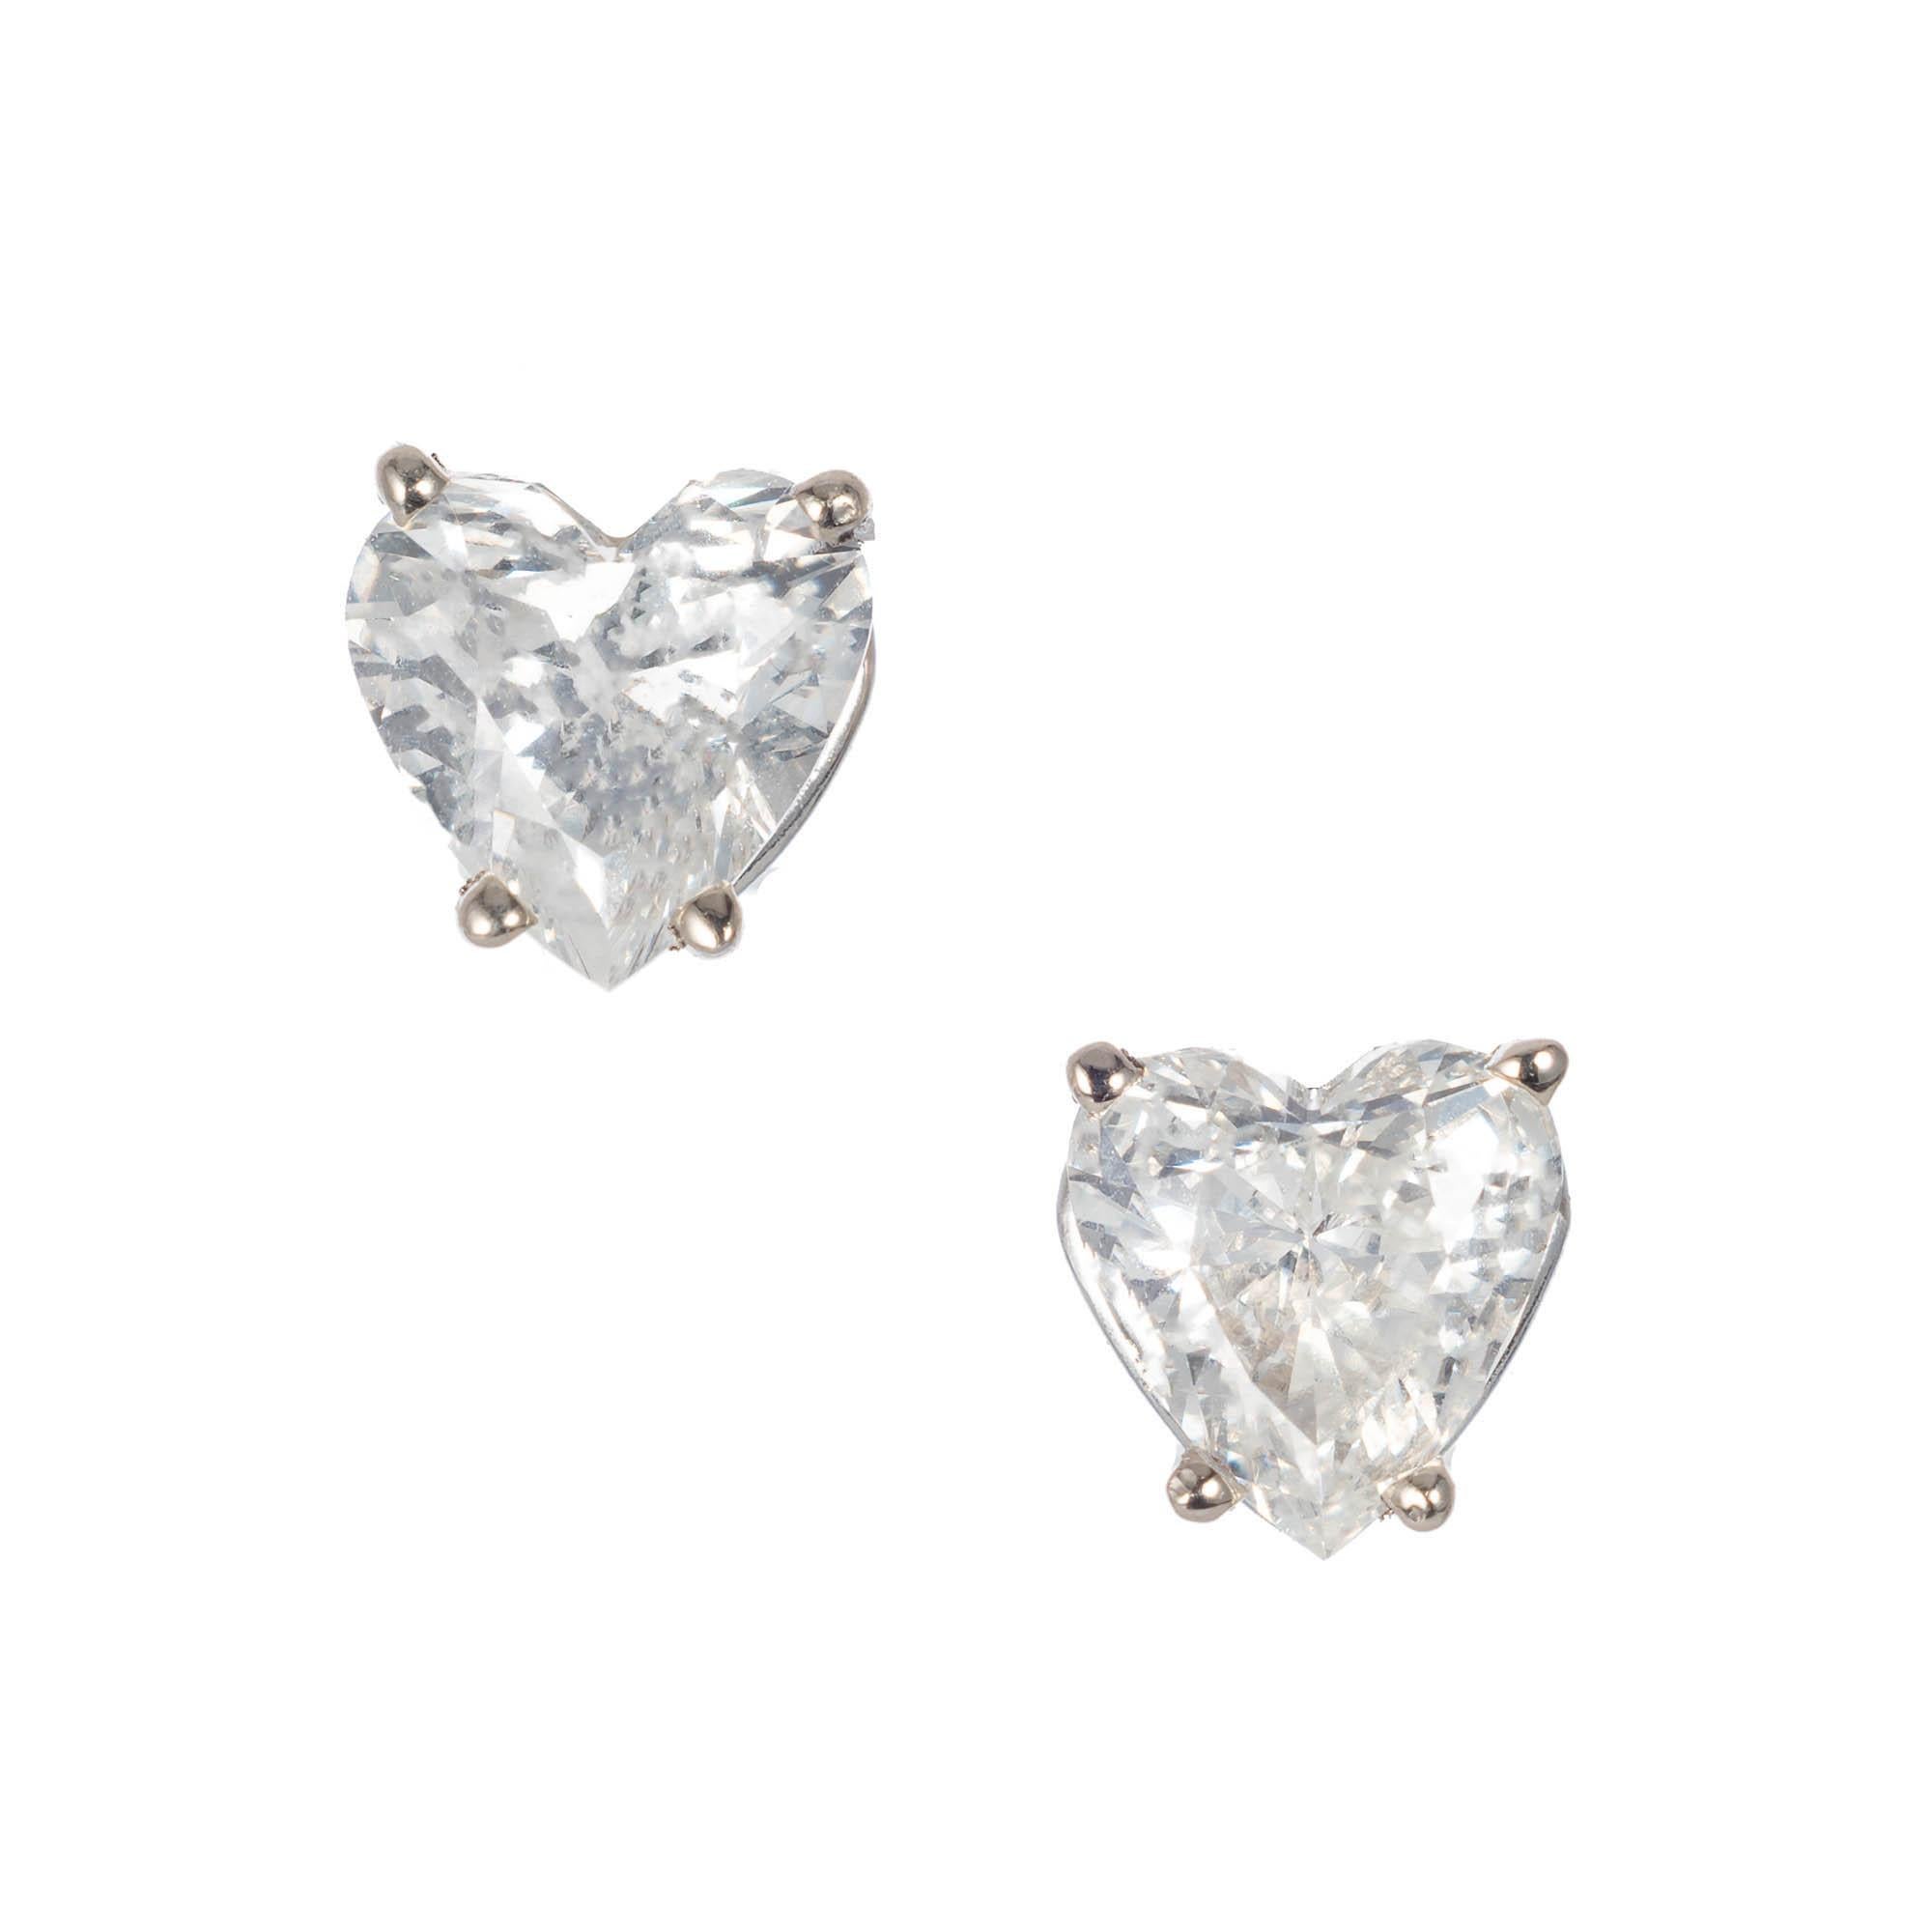 Peter Suchy 1.11 Carat Diamond White Gold Heart Shaped Stud Earrings